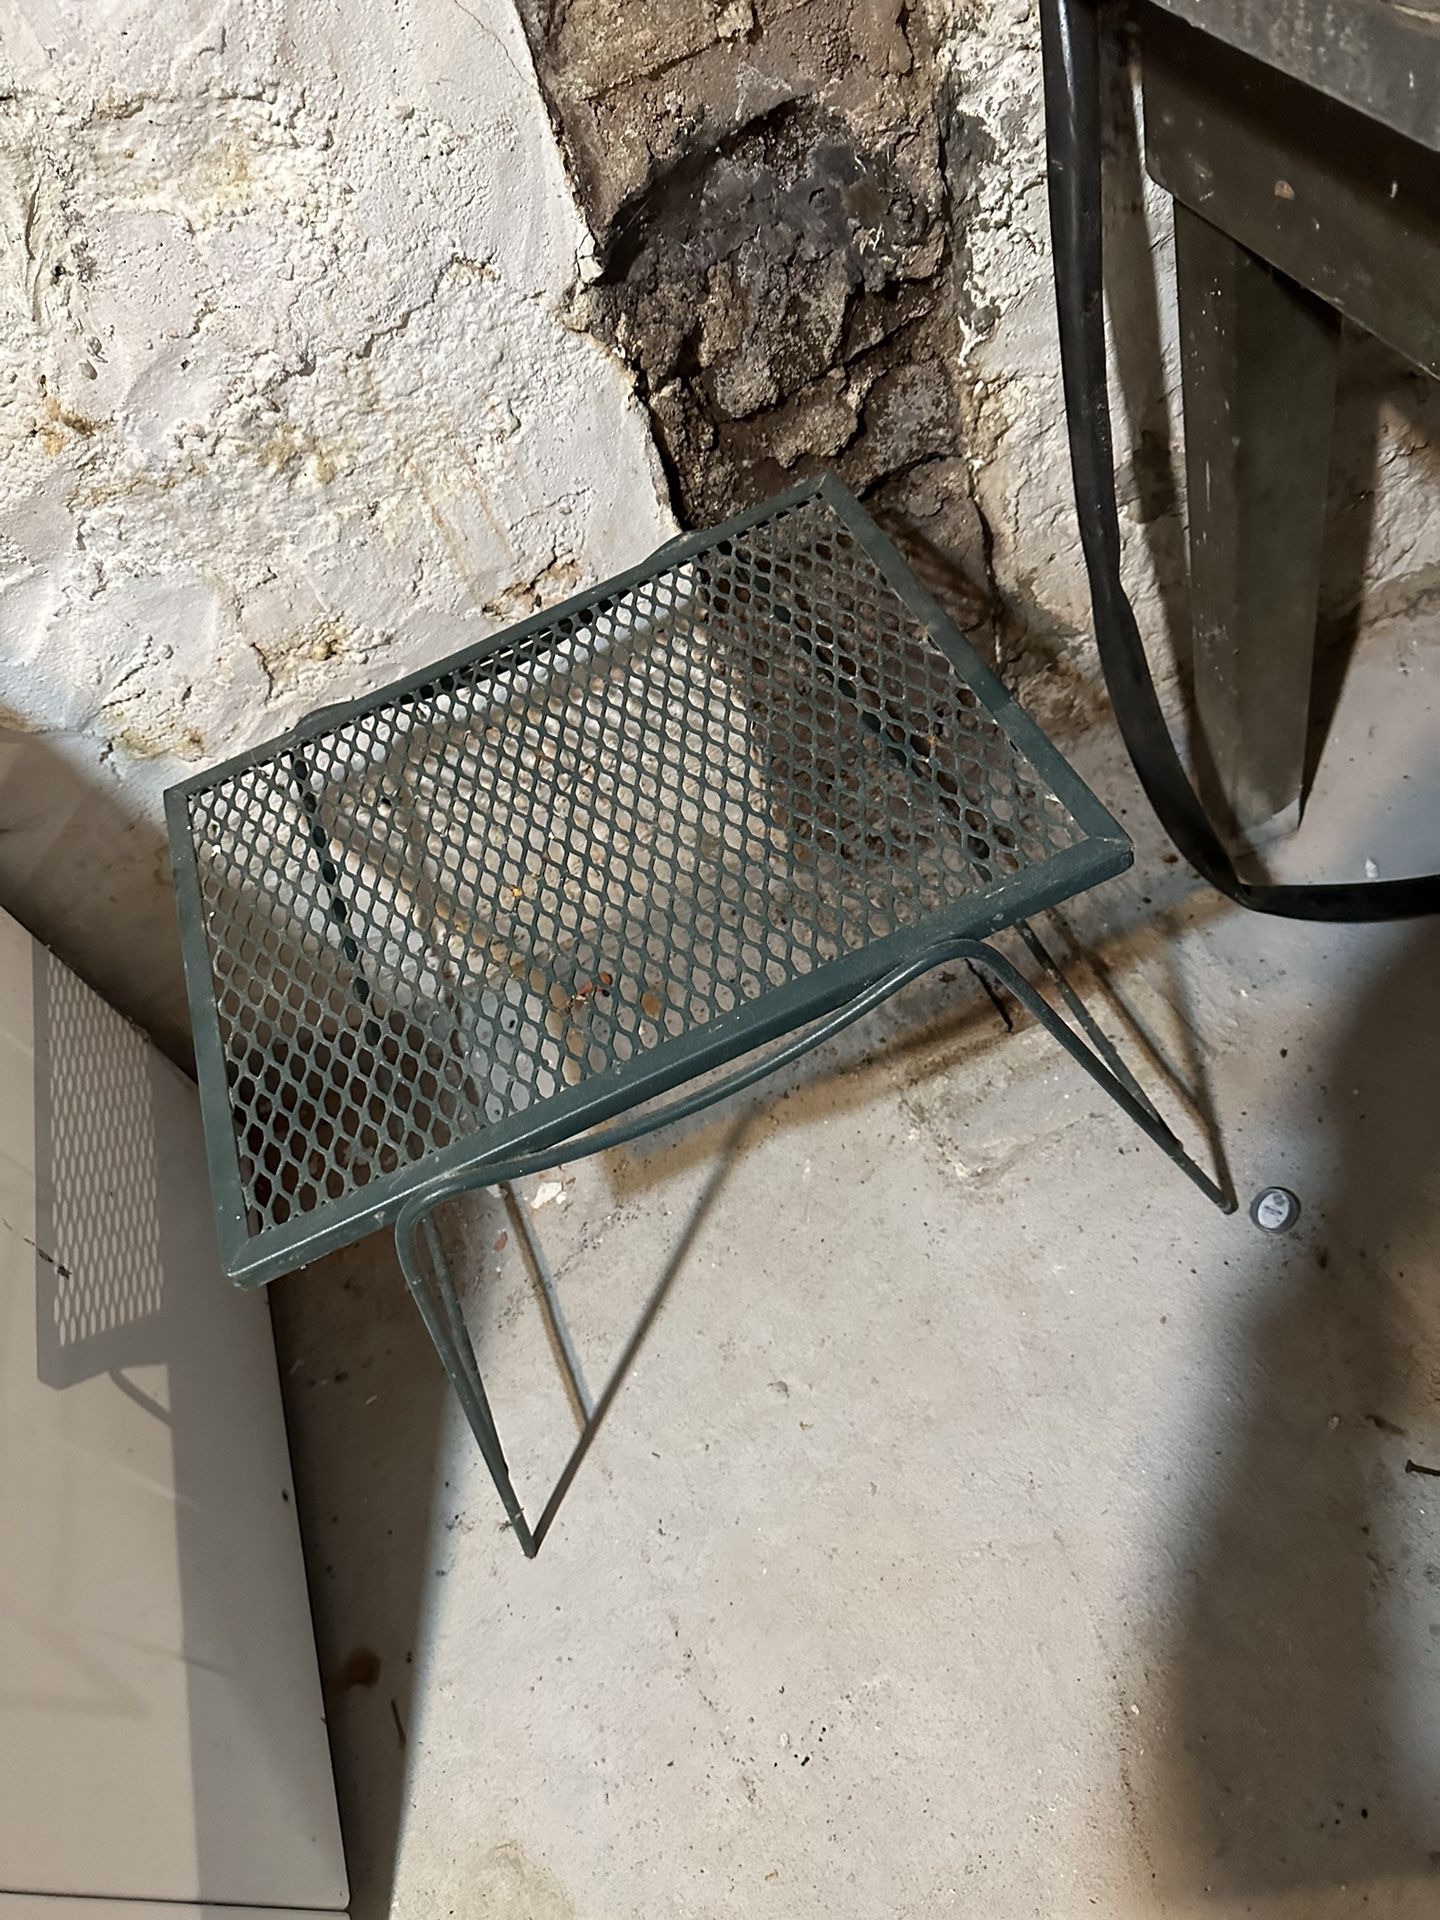 Small Metal Outdoor Table